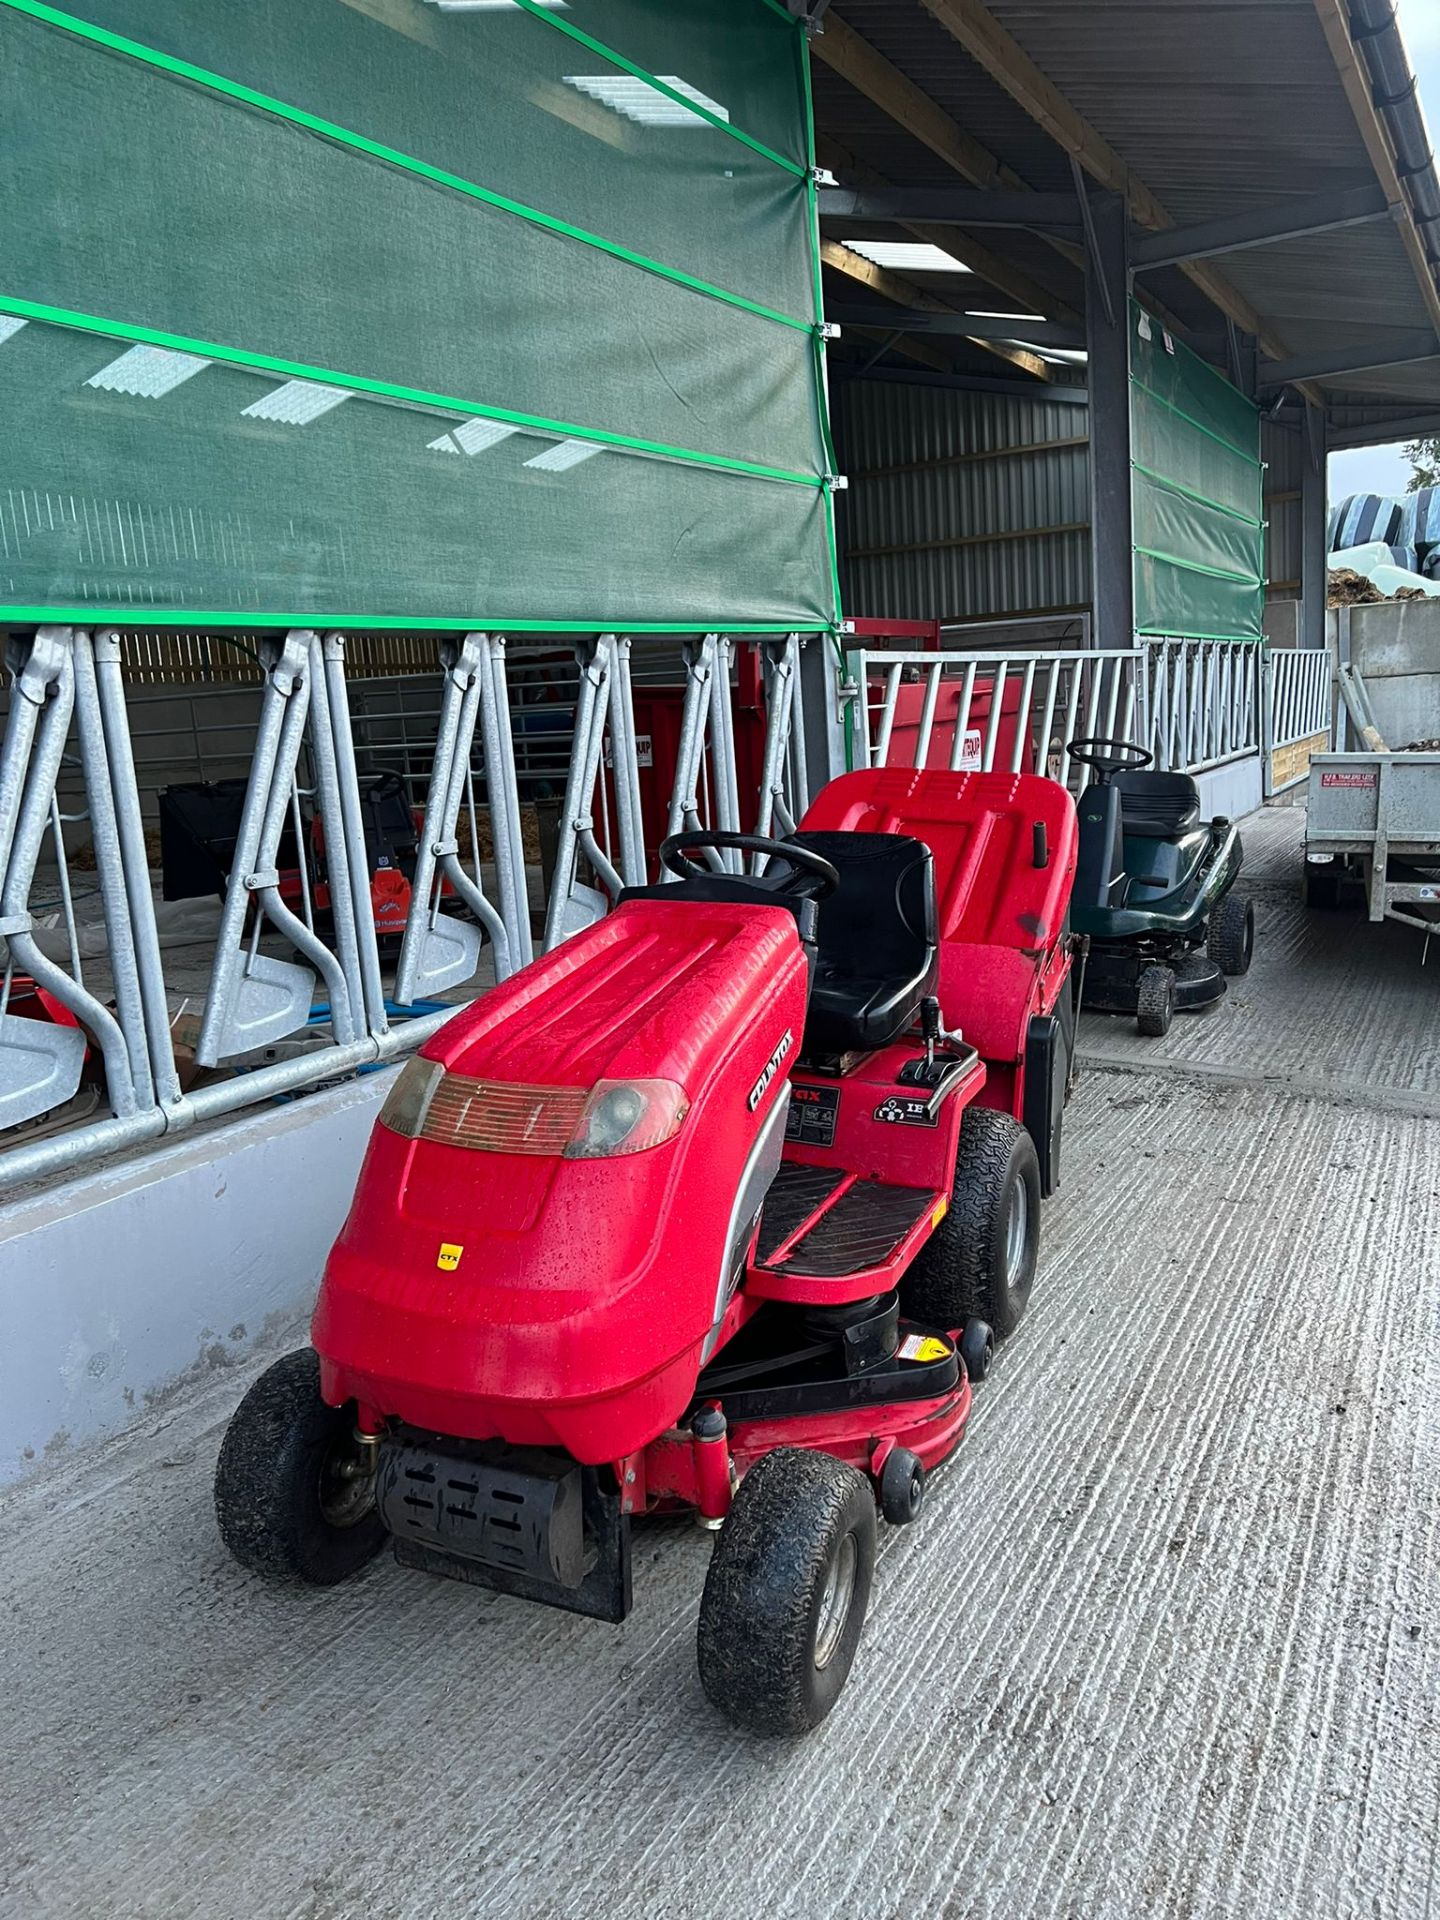 COUNTAX C300H RIDE ON LAWN MOWER, RUNS WORKS AND CUTS WELL, 13hP HONDA ENGINE *NO VAT* - Image 2 of 5